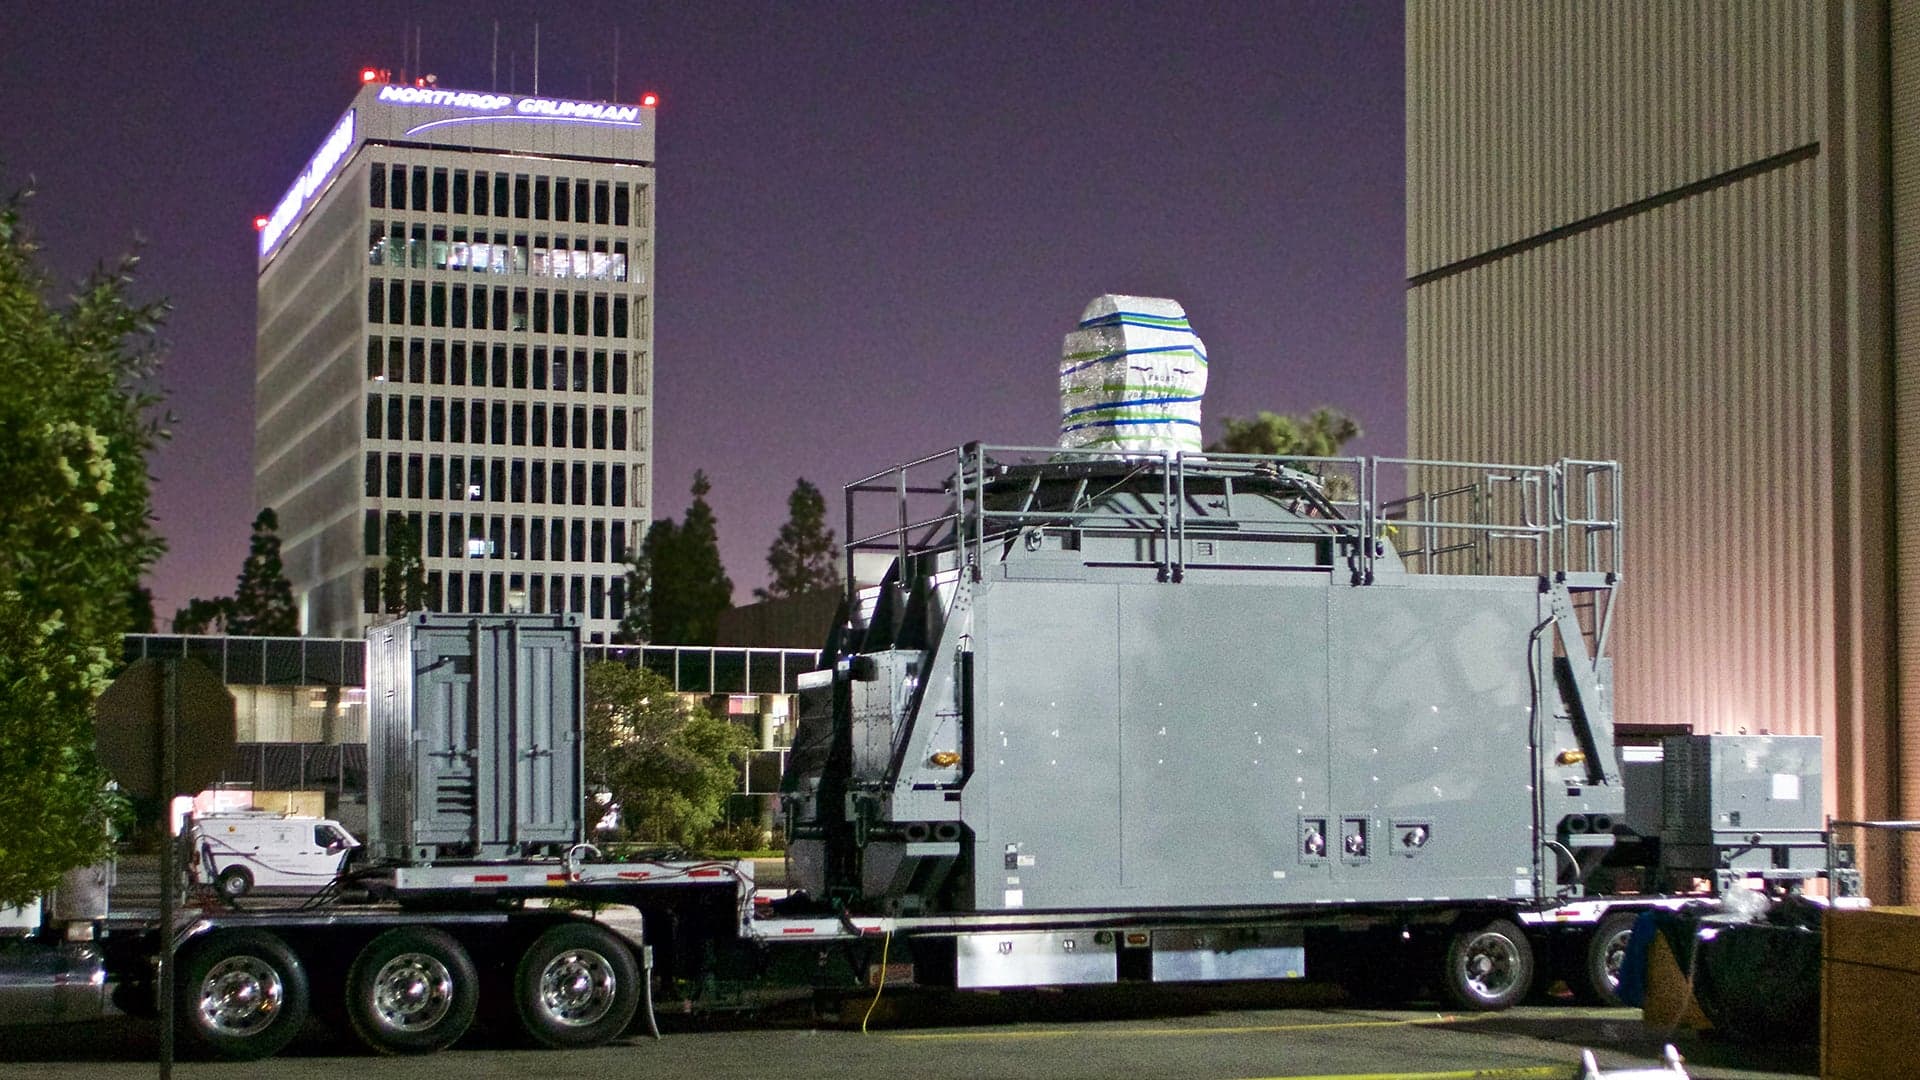 Mysterious Object Northrop Is Barging From Redondo Beach Is A High-Power Naval Laser